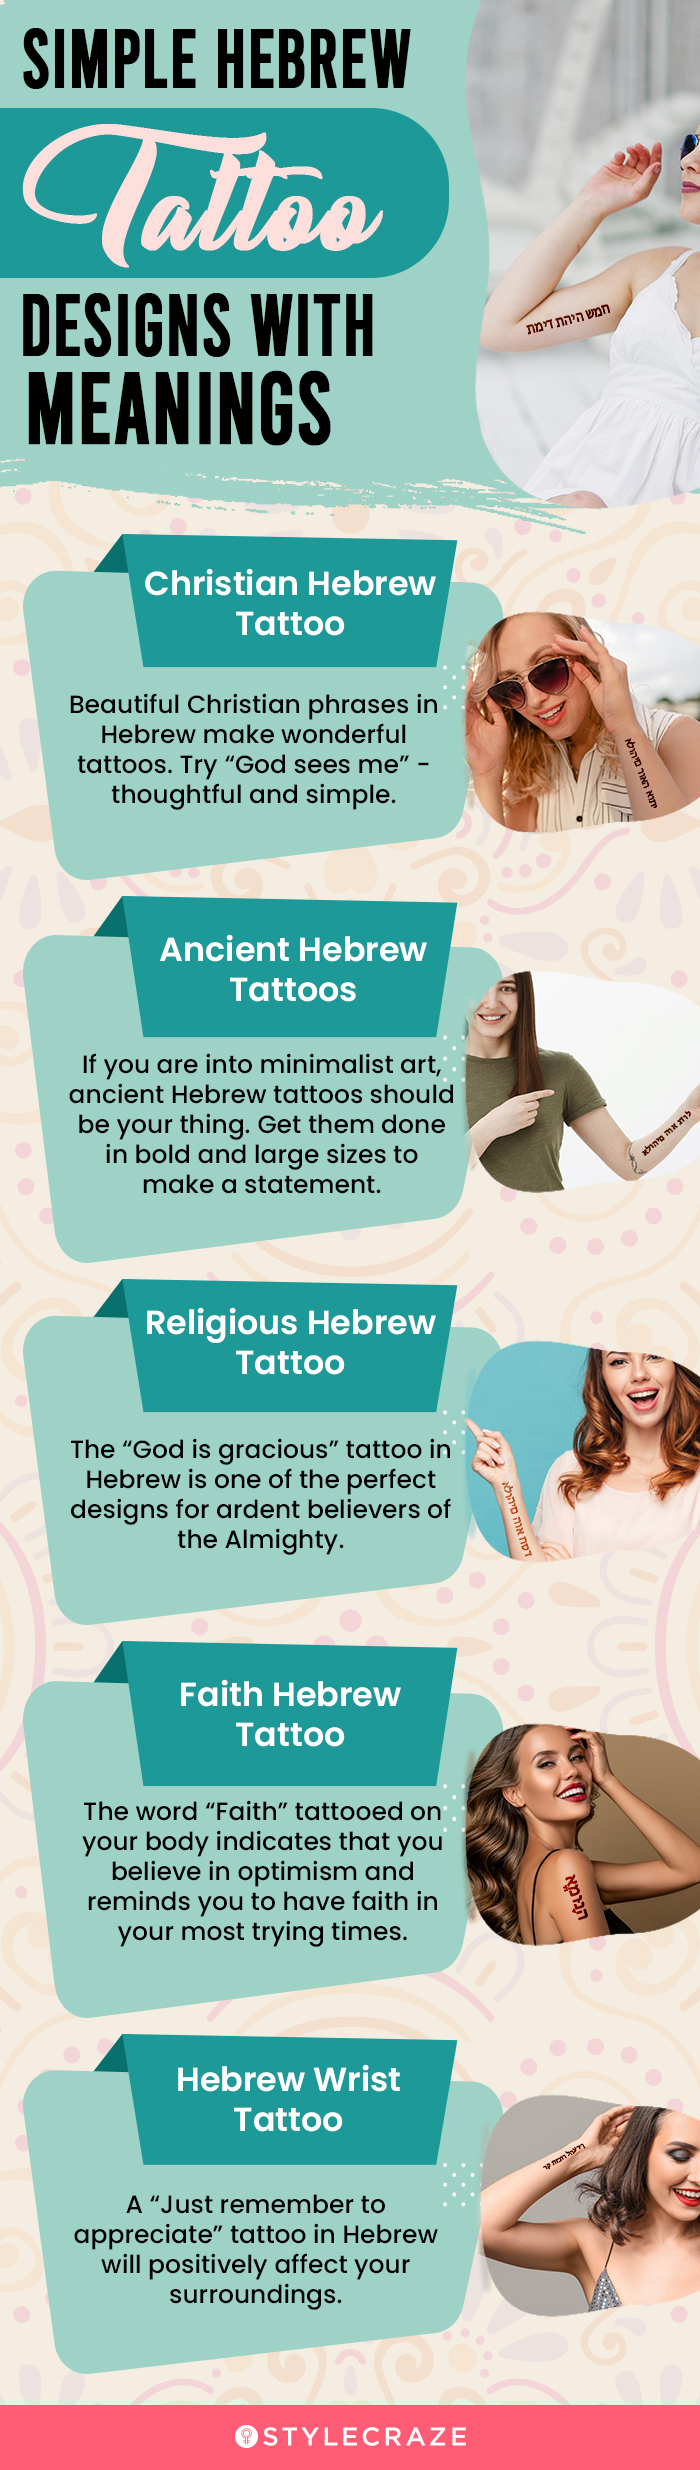 Hebrew tattoos | Truth, Praise and Help